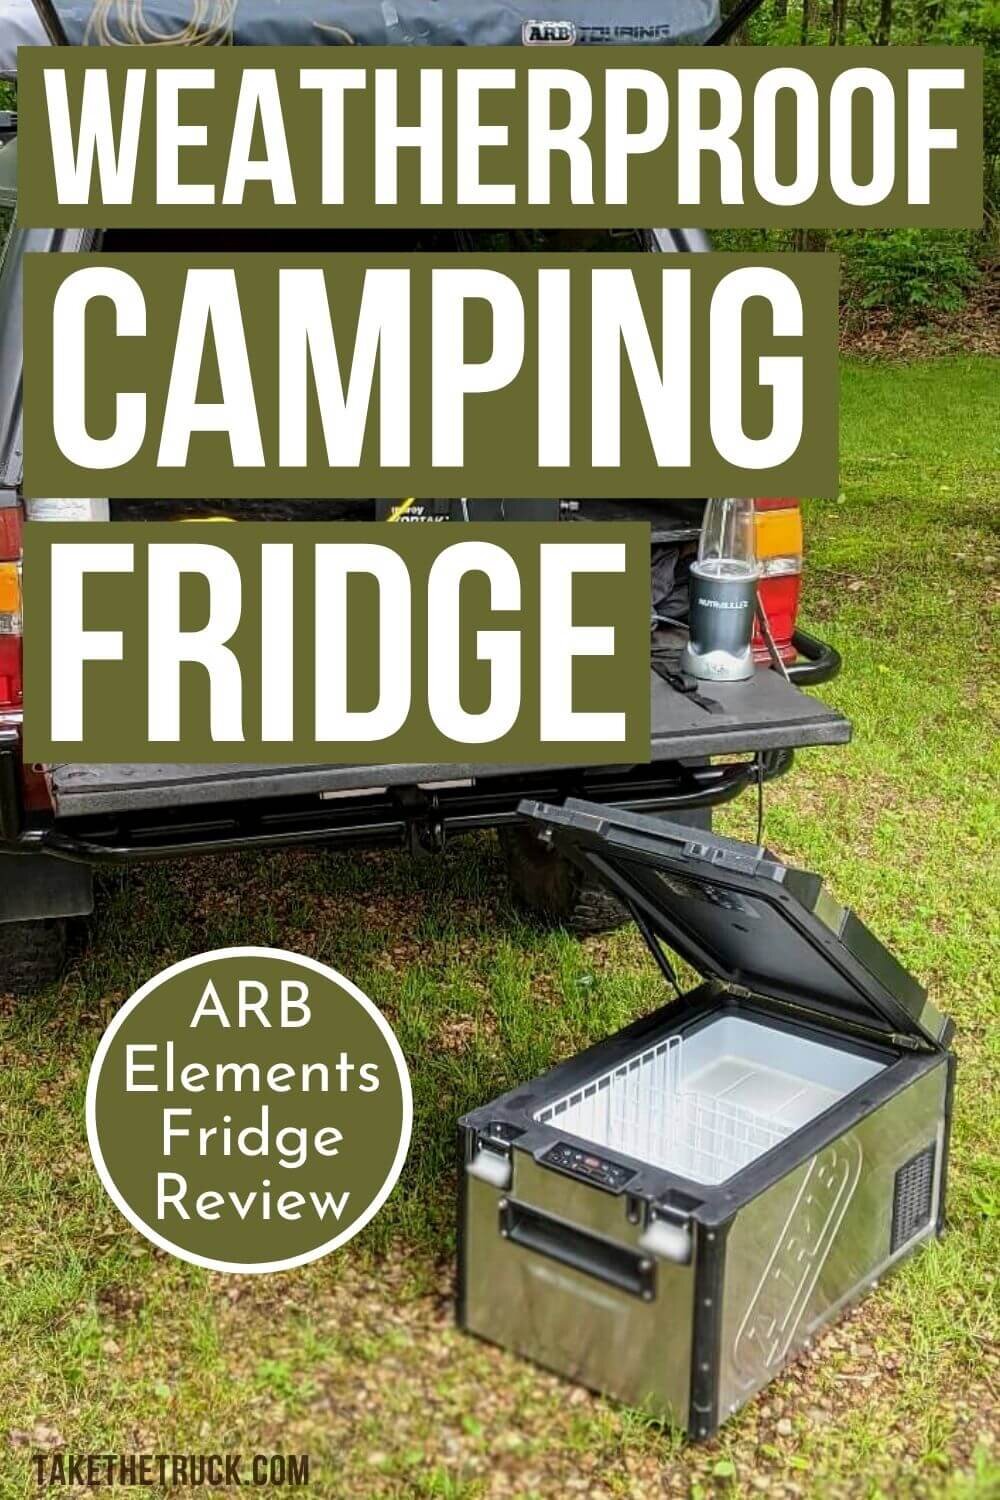 The ARB Elements Fridge is a great outdoor fridge for camping and the best overland fridge - read why the ARB Elements Fridge is a quality piece of gear for camping and overlanding.